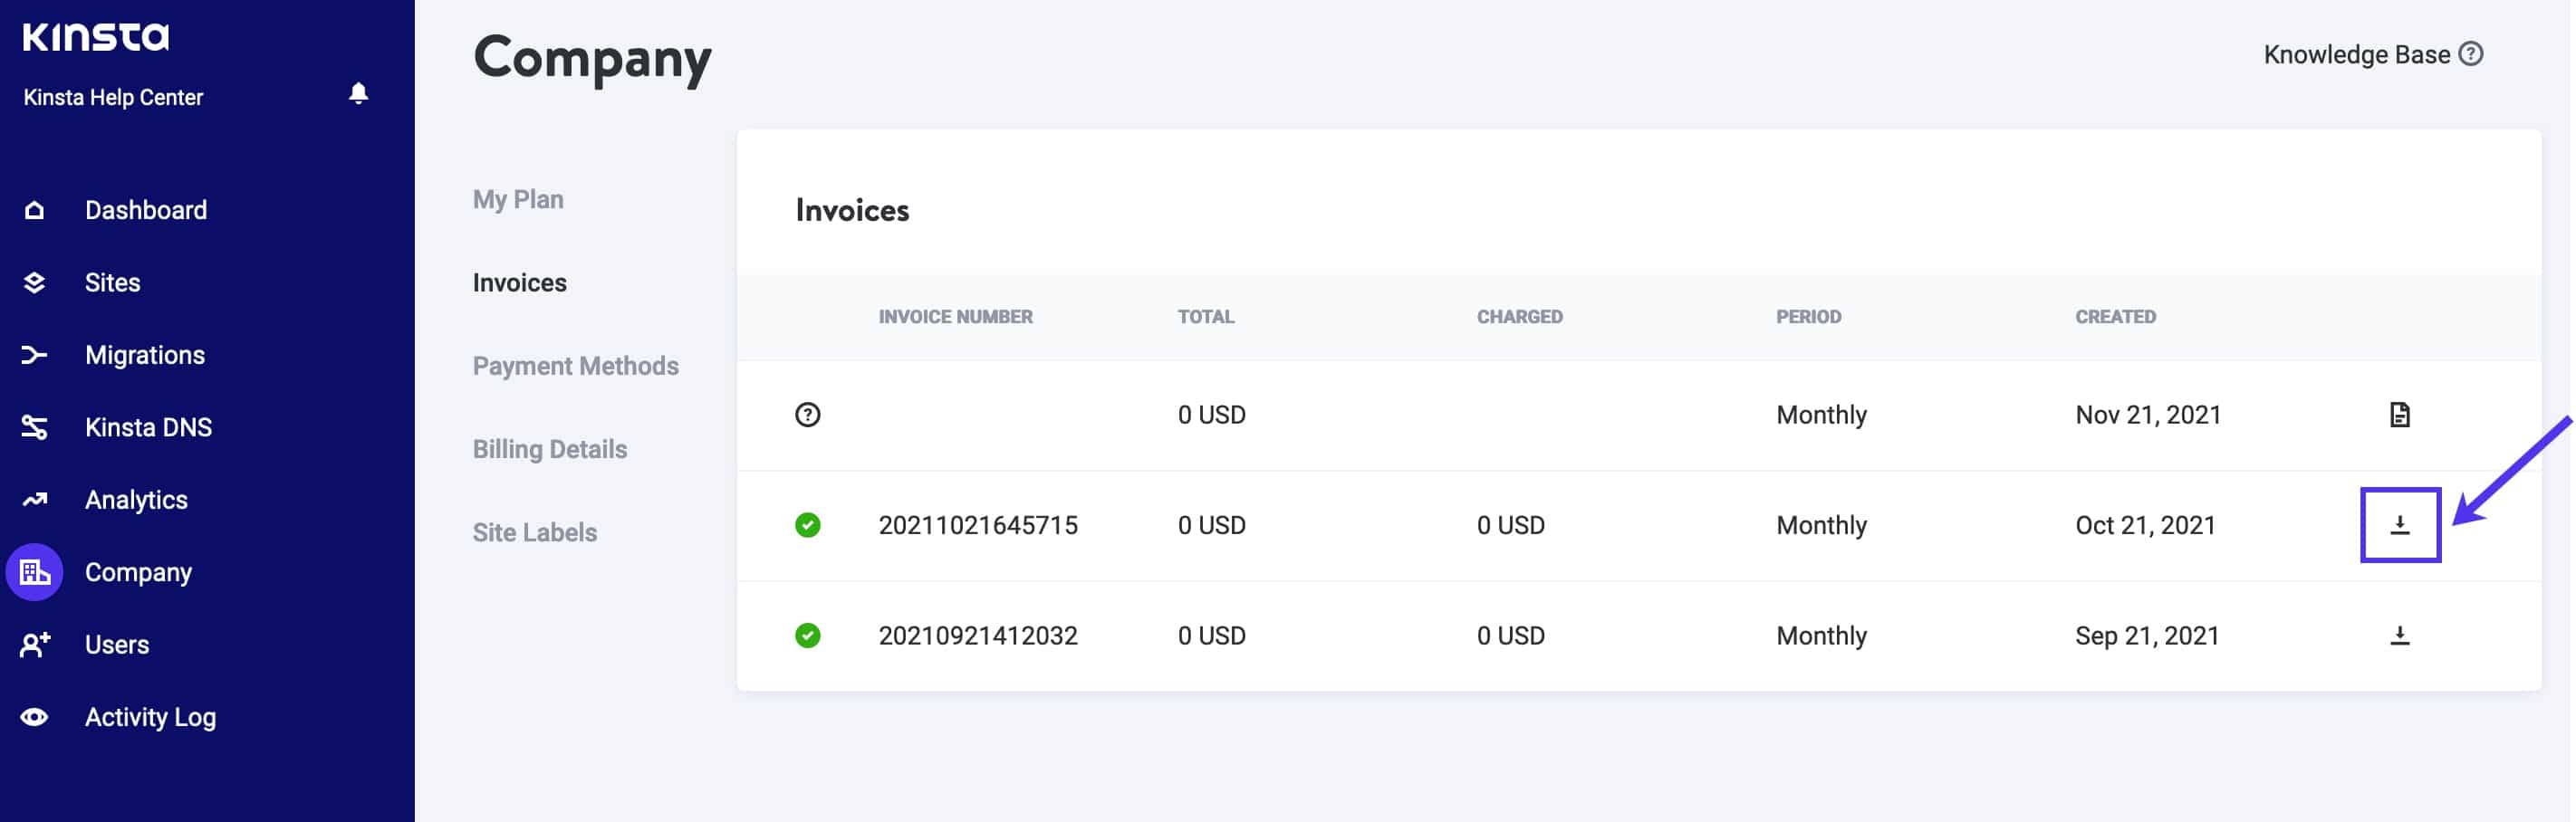 Download an invoice from MyKinsta.